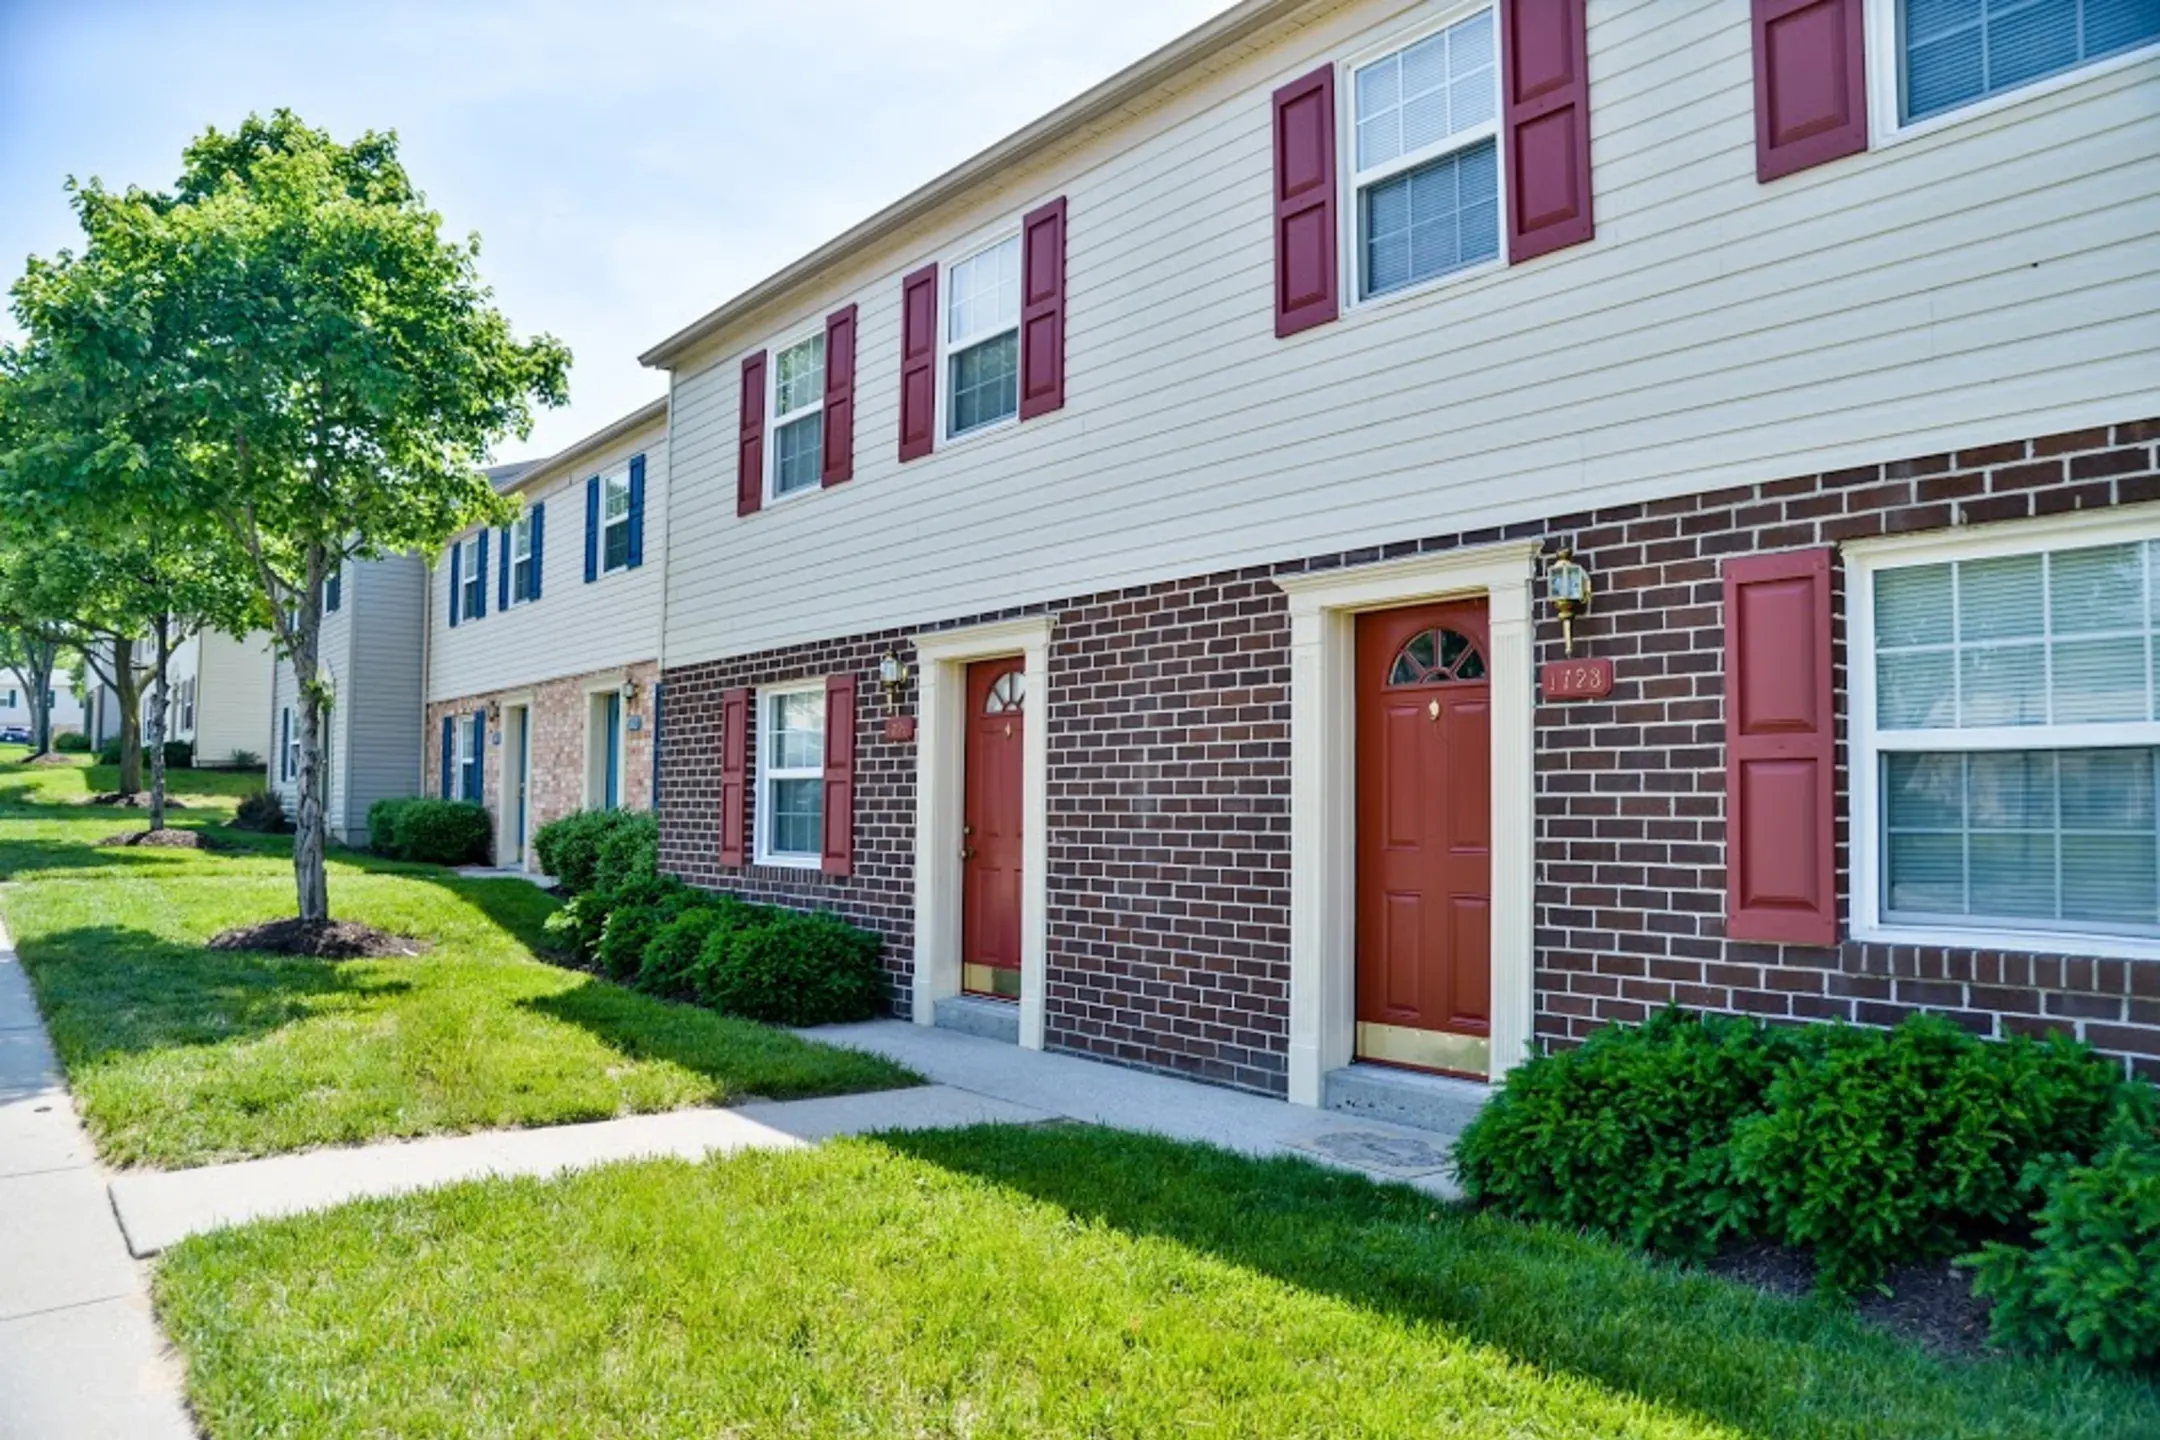 Building - Lake Village Townhomes - Severn, MD